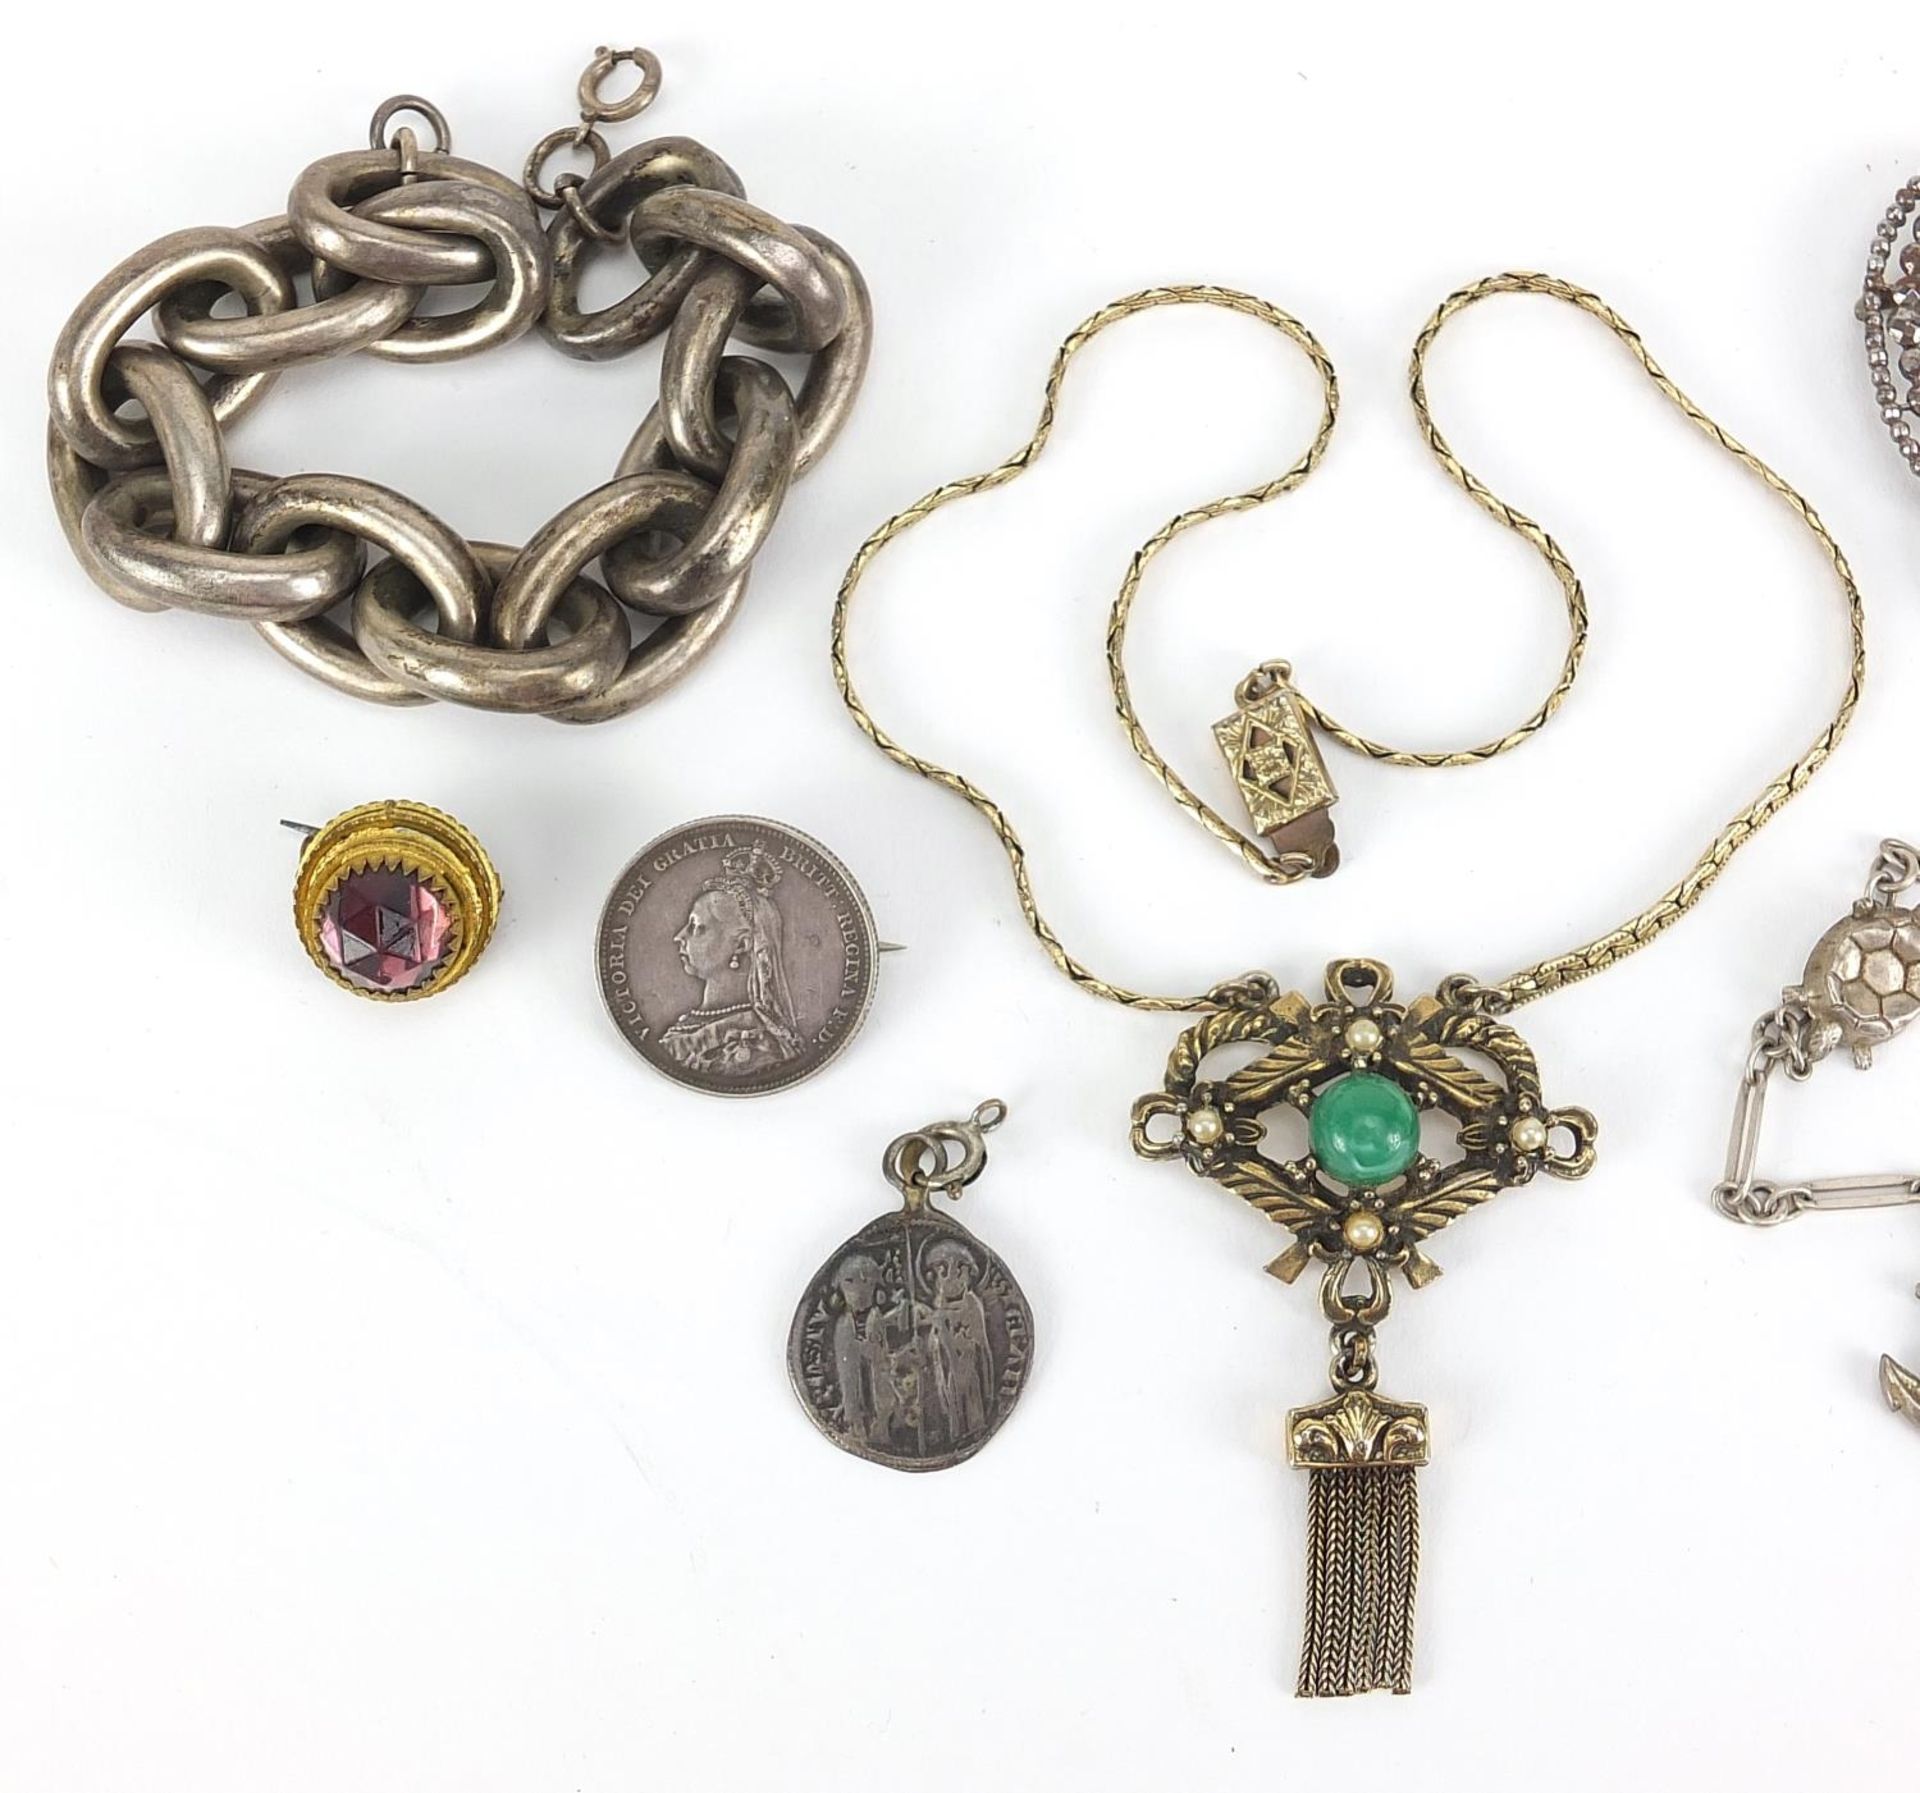 Antique and later jewellery including cut steel, silver charm bracelet, 1887 coin brooch and a large - Image 2 of 4